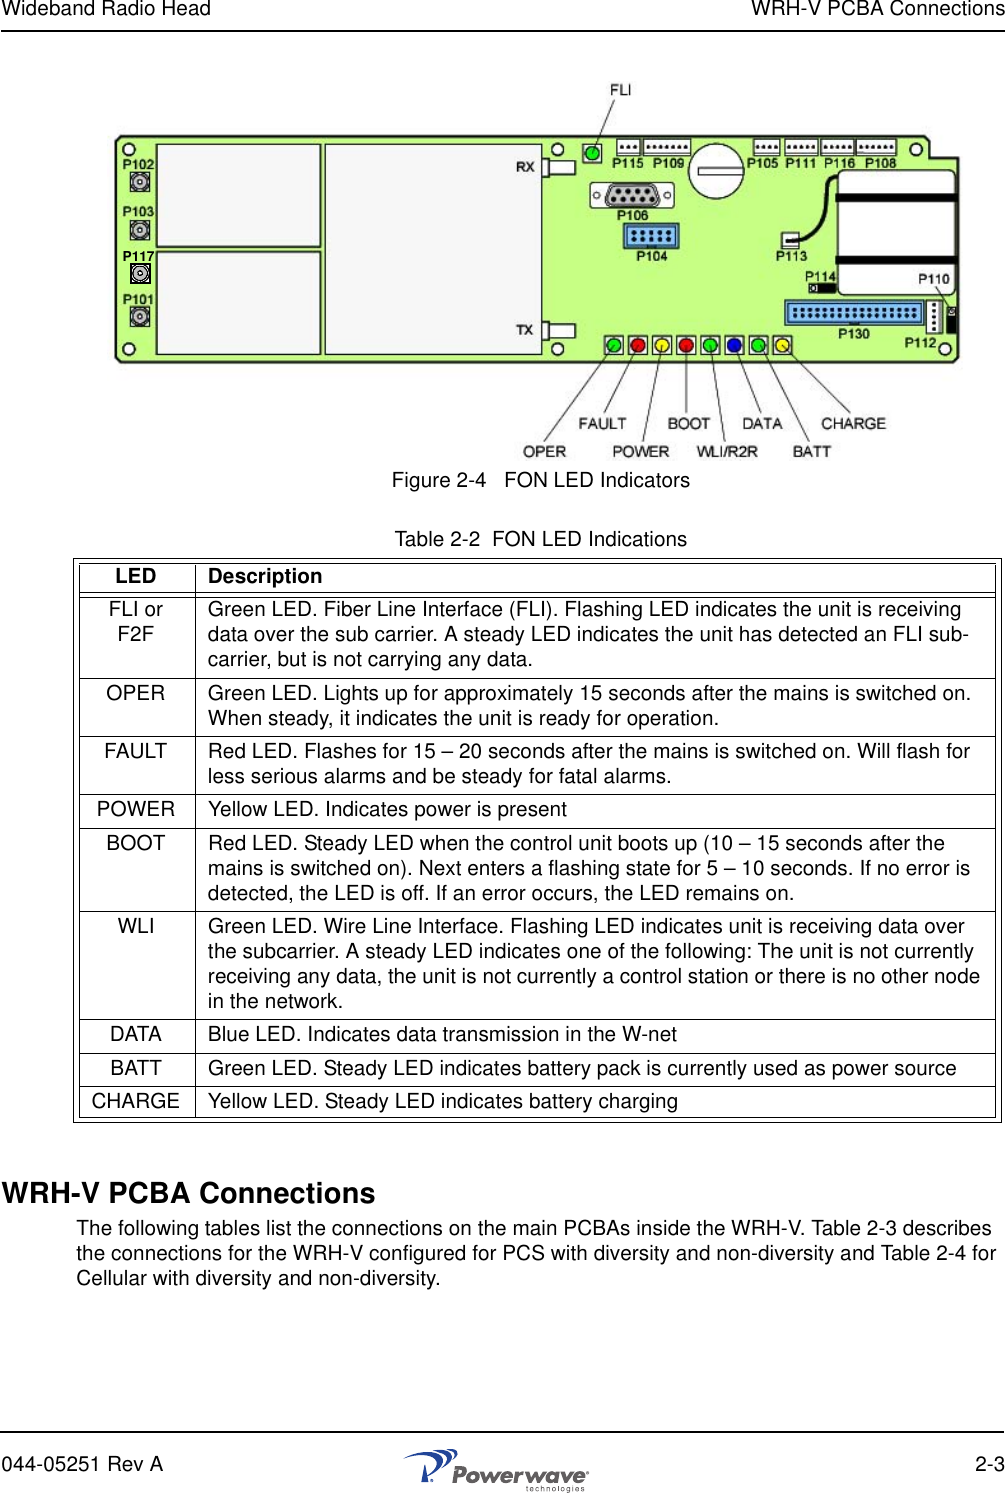 Wideband Radio Head WRH-V PCBA Connections044-05251 Rev A 2-3Figure 2-4   FON LED IndicatorsTable 2-2  FON LED IndicationsWRH-V PCBA ConnectionsThe following tables list the connections on the main PCBAs inside the WRH-V. Table 2-3 describes the connections for the WRH-V configured for PCS with diversity and non-diversity and Table 2-4 for Cellular with diversity and non-diversity.LED DescriptionFLI or F2F Green LED. Fiber Line Interface (FLI). Flashing LED indicates the unit is receiving data over the sub carrier. A steady LED indicates the unit has detected an FLI sub-carrier, but is not carrying any data.OPER Green LED. Lights up for approximately 15 seconds after the mains is switched on. When steady, it indicates the unit is ready for operation.FAULT Red LED. Flashes for 15 – 20 seconds after the mains is switched on. Will flash for less serious alarms and be steady for fatal alarms.POWER Yellow LED. Indicates power is presentBOOT Red LED. Steady LED when the control unit boots up (10 – 15 seconds after the mains is switched on). Next enters a flashing state for 5 – 10 seconds. If no error is detected, the LED is off. If an error occurs, the LED remains on.WLI Green LED. Wire Line Interface. Flashing LED indicates unit is receiving data over the subcarrier. A steady LED indicates one of the following: The unit is not currently receiving any data, the unit is not currently a control station or there is no other node in the network.DATA Blue LED. Indicates data transmission in the W-netBATT Green LED. Steady LED indicates battery pack is currently used as power sourceCHARGE Yellow LED. Steady LED indicates battery chargingP117